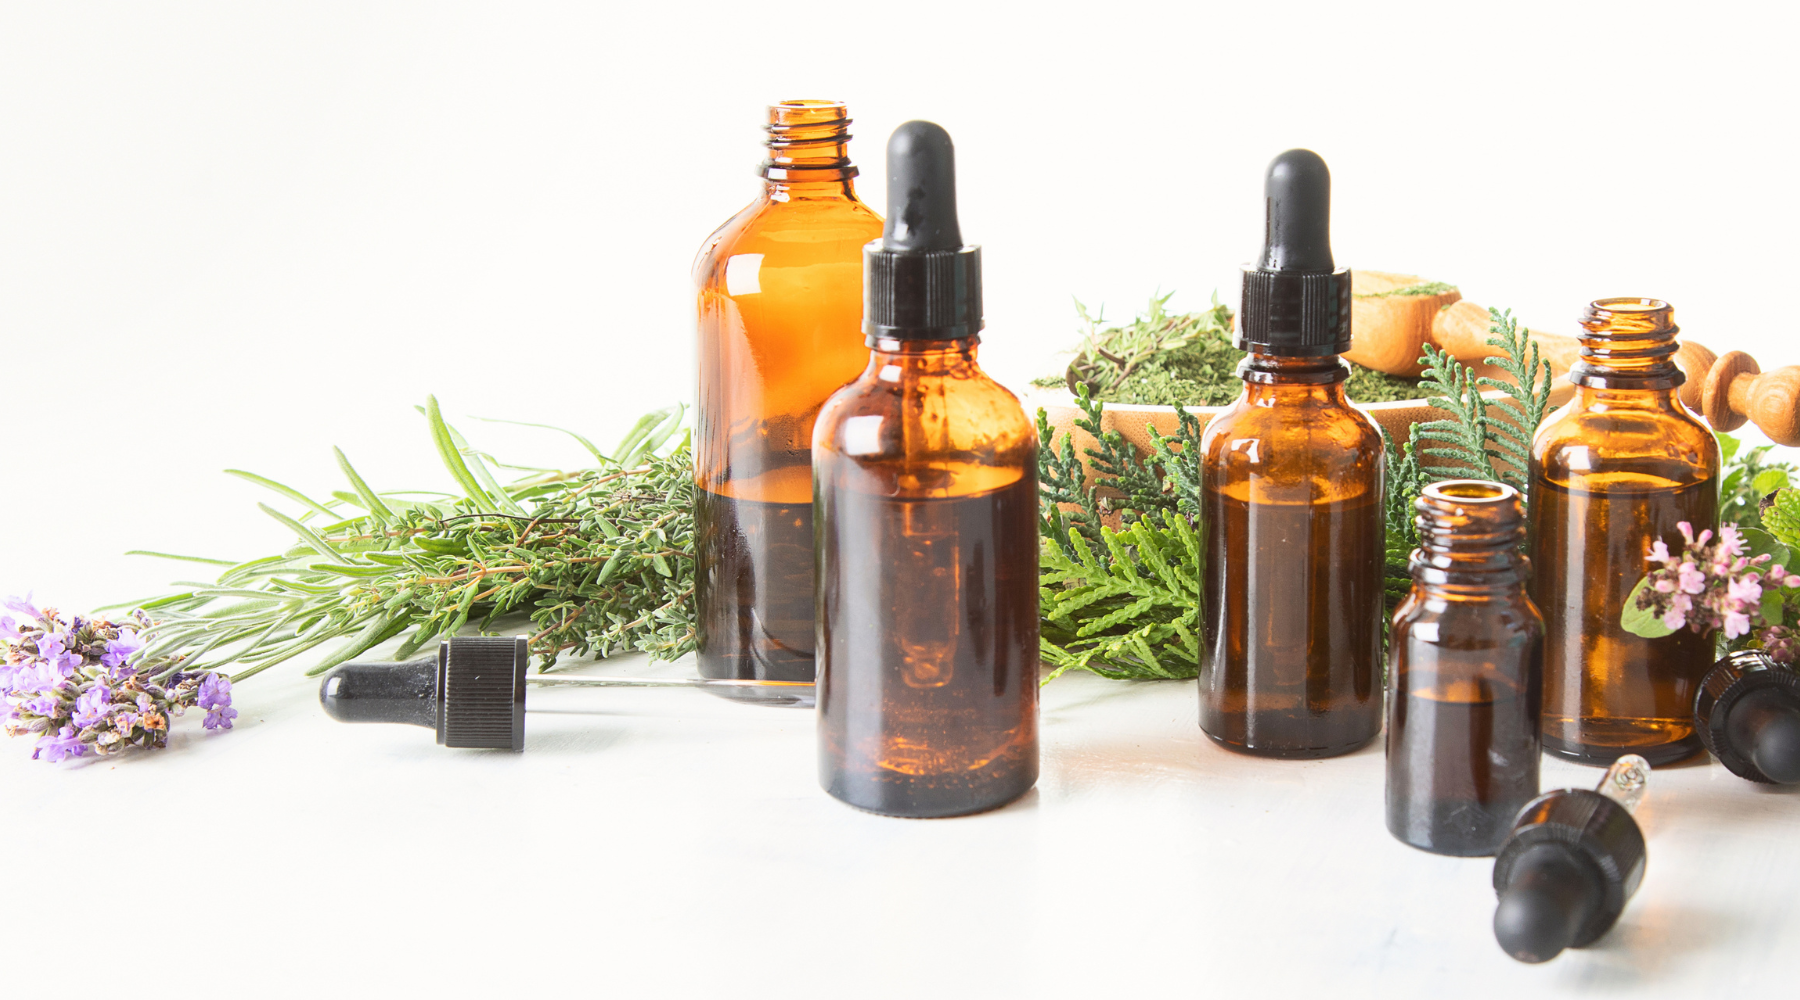 THE HYPE BEHIND ESSENTIAL OILS